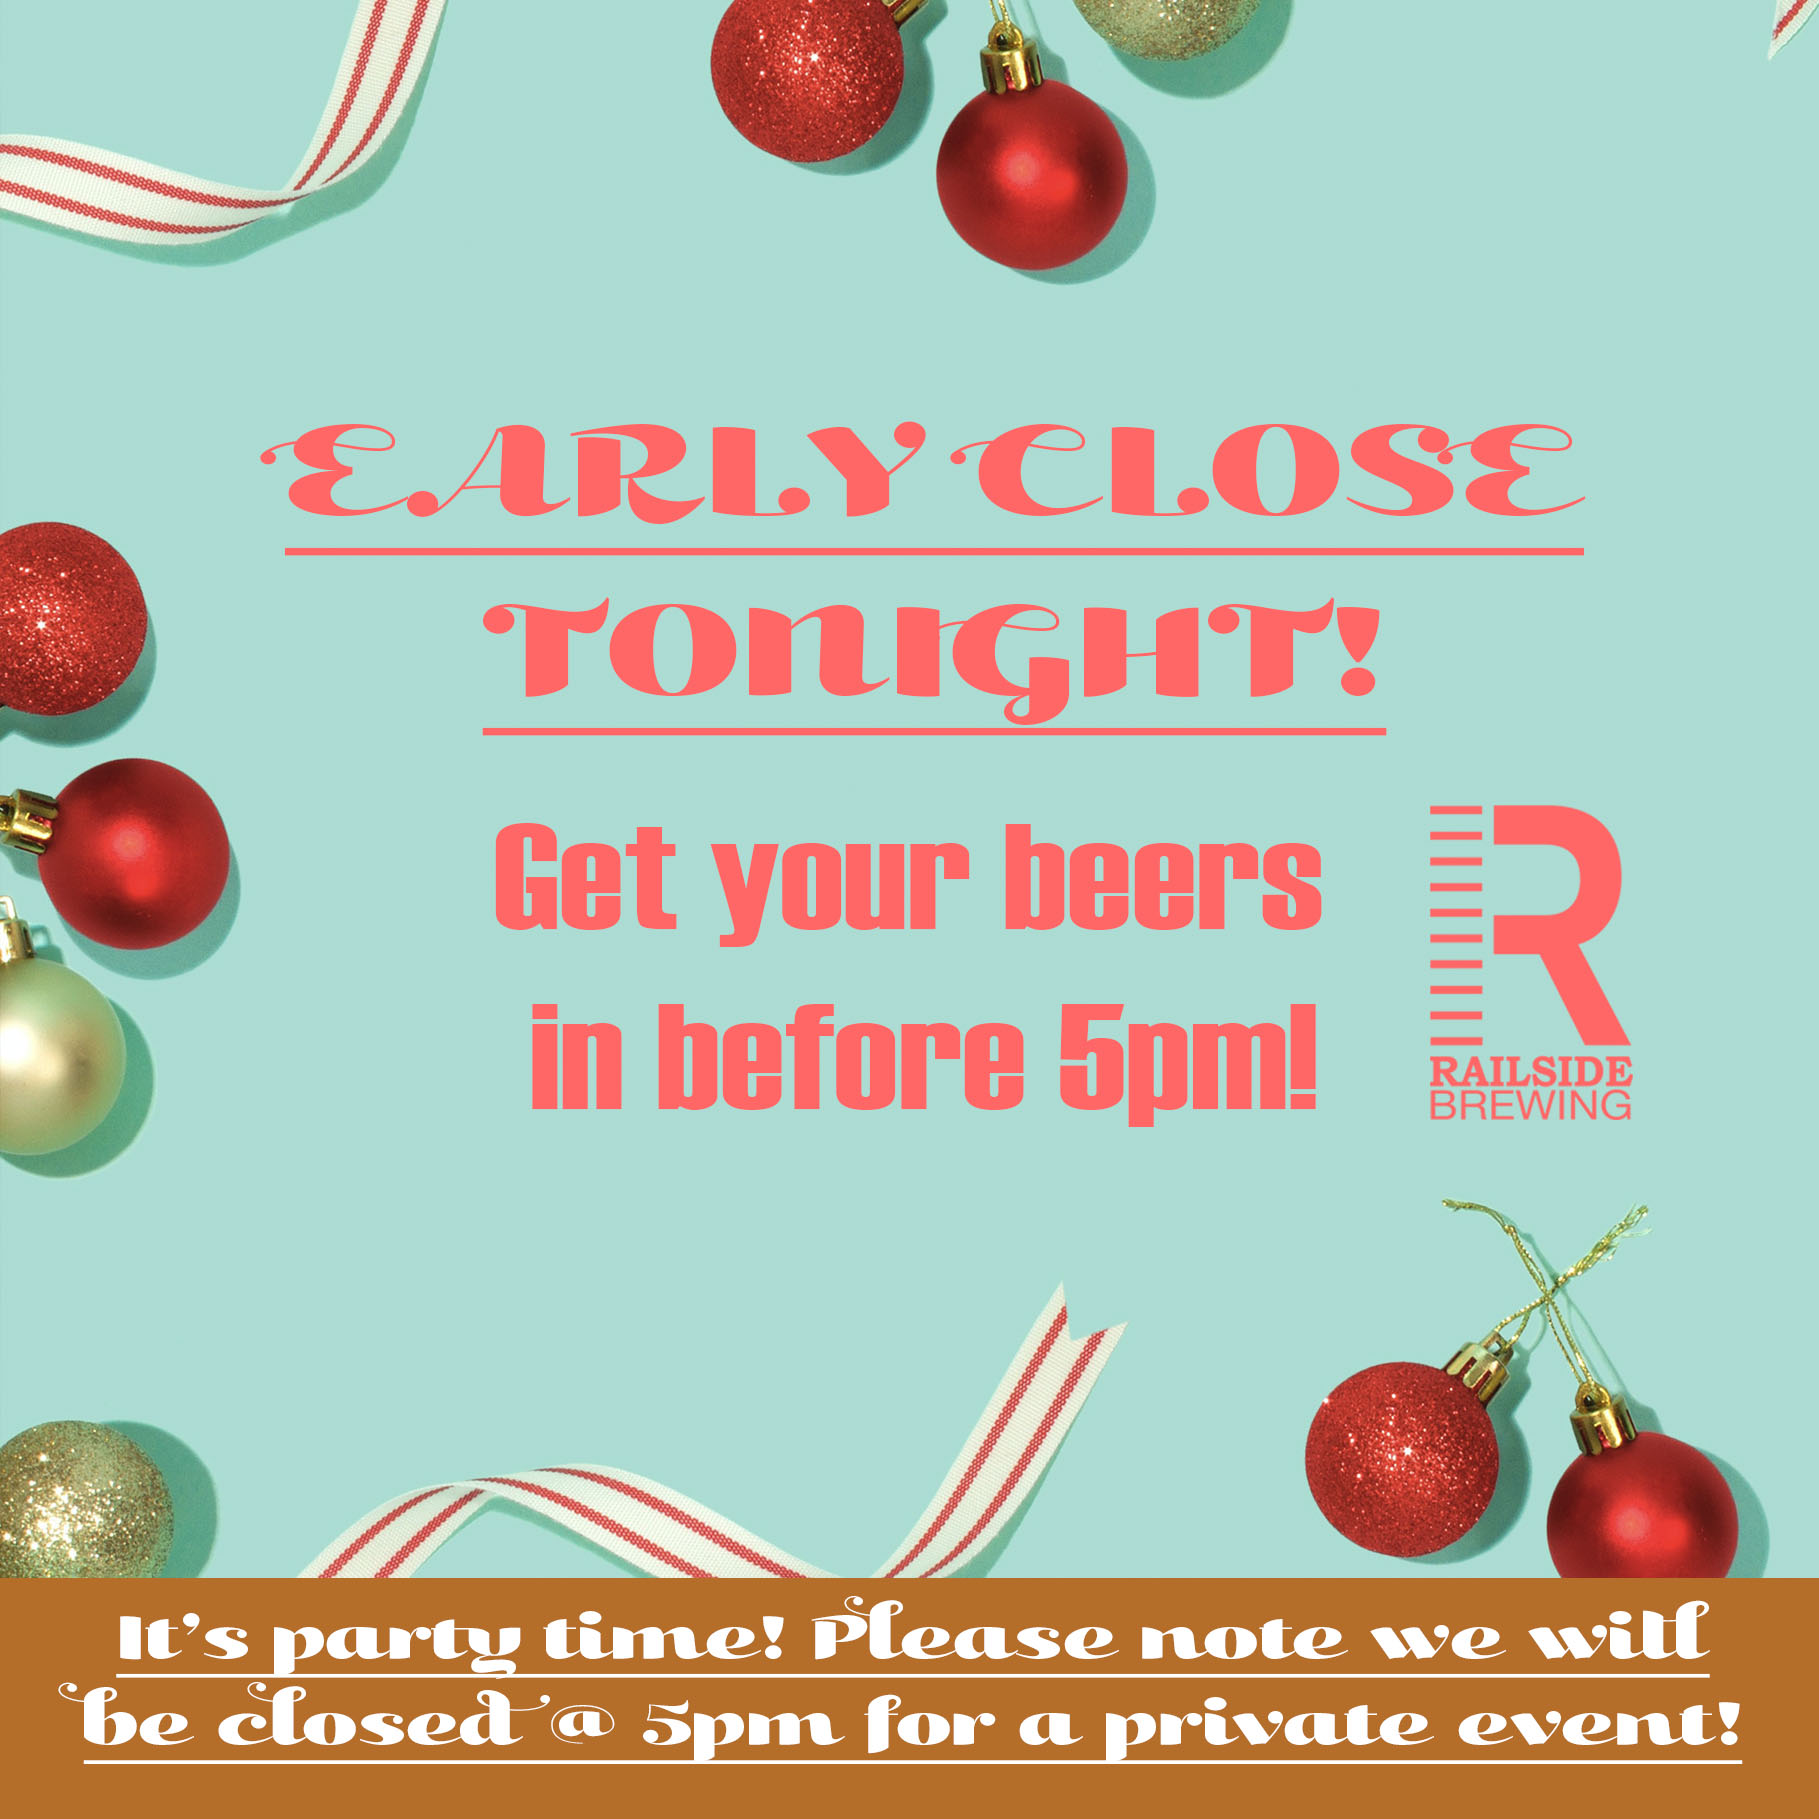 early party closure railside